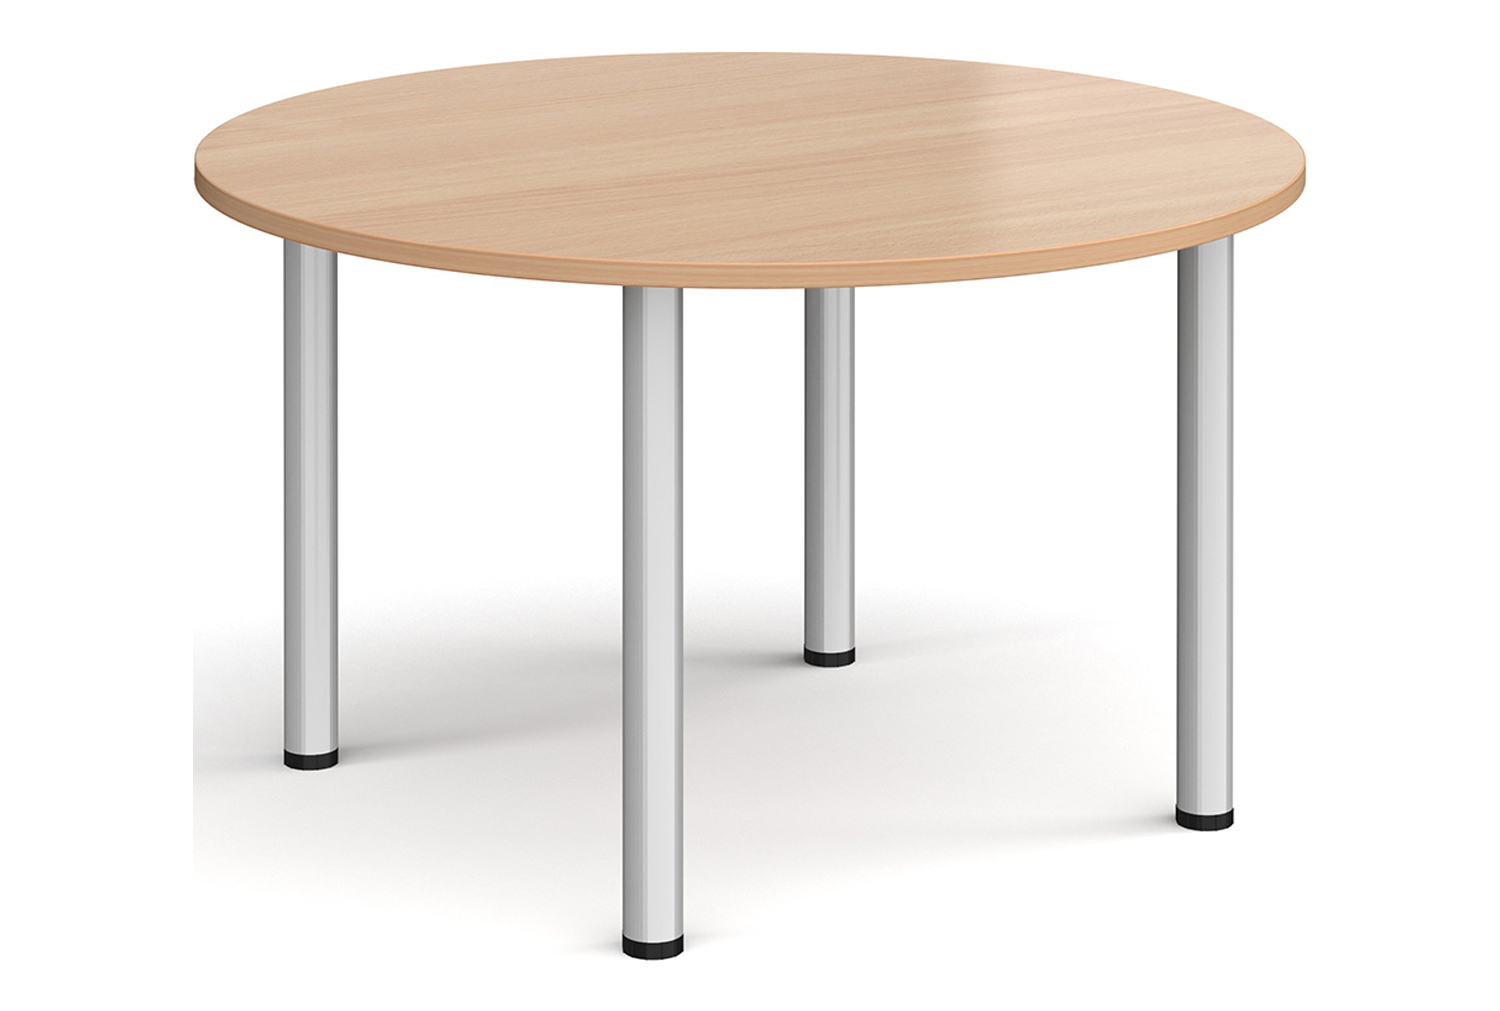 Bowers Round Meeting Table, 120diax73h (cm), Beech, Express Delivery